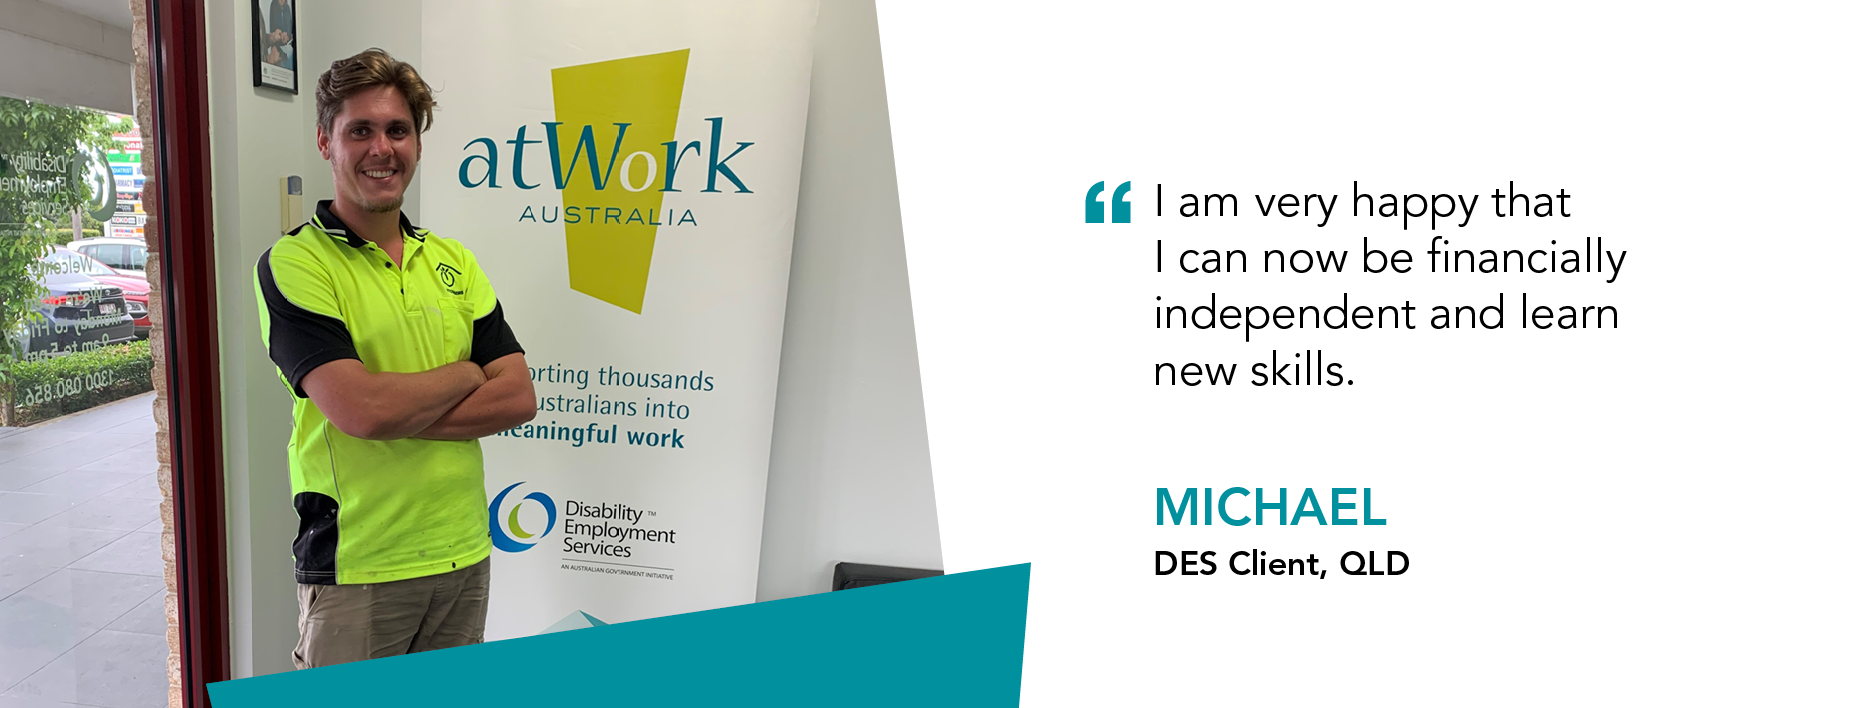 "I am happy that I can now be financially independent and learn new skills." Michael, DES Client, QLD